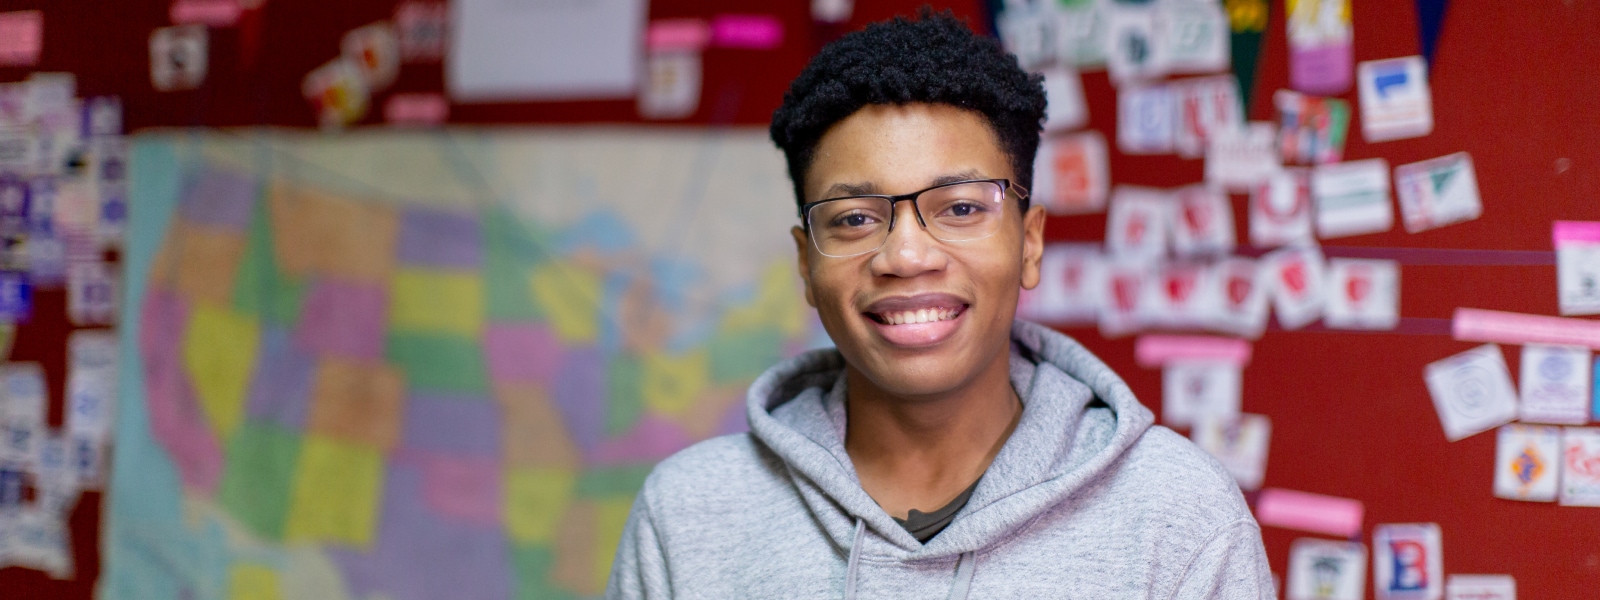 A smiling high school student standing in a classroom.